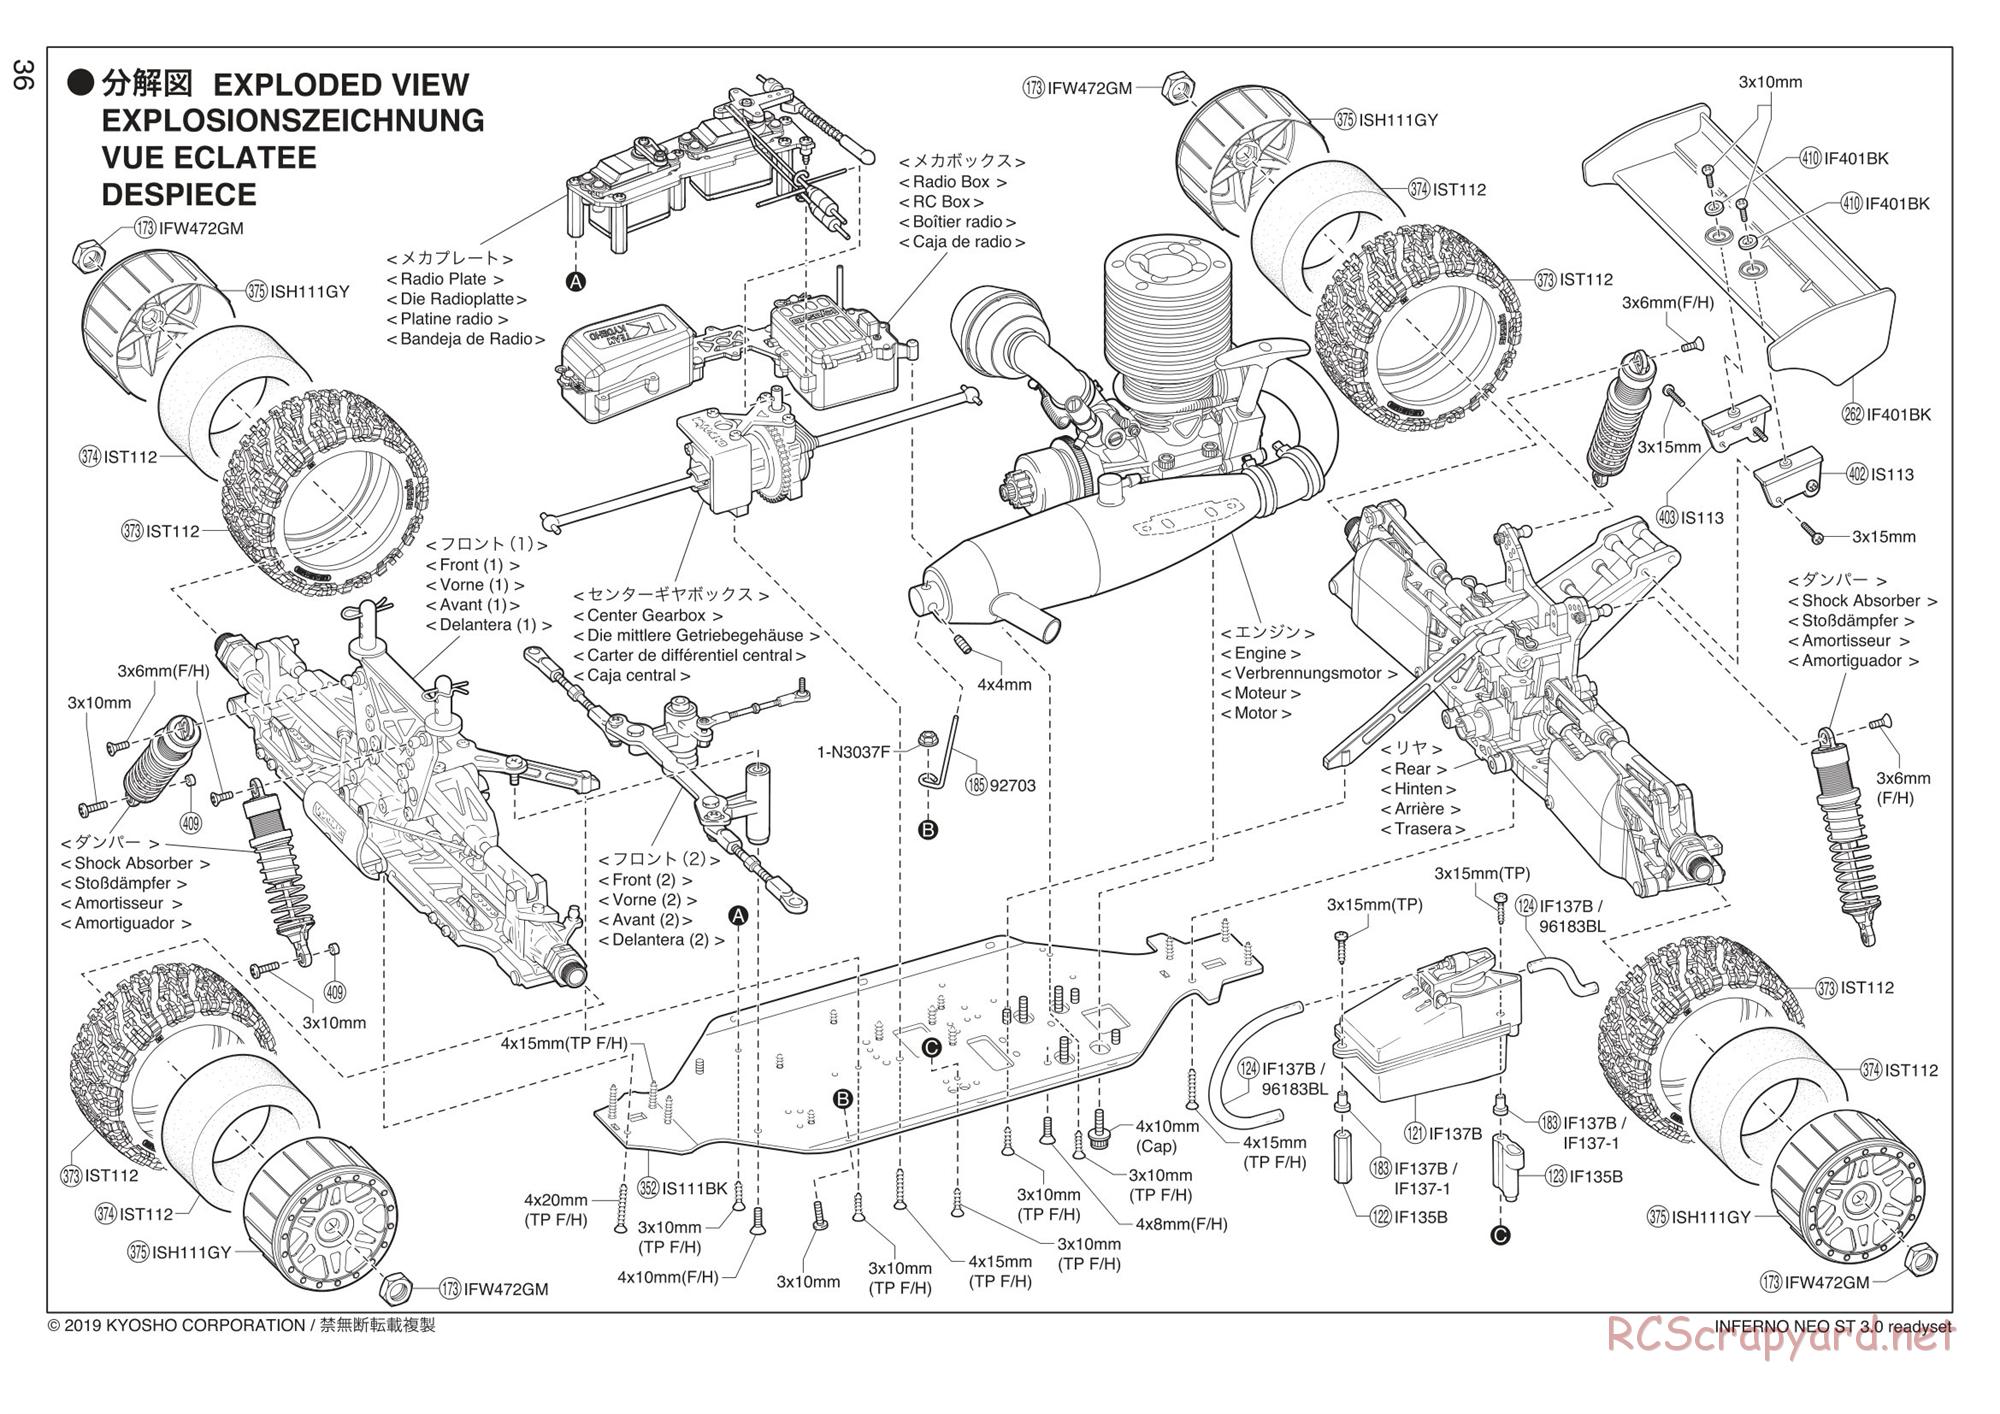 Kyosho - Inferno Neo ST 3.0 - Exploded Views - Page 1